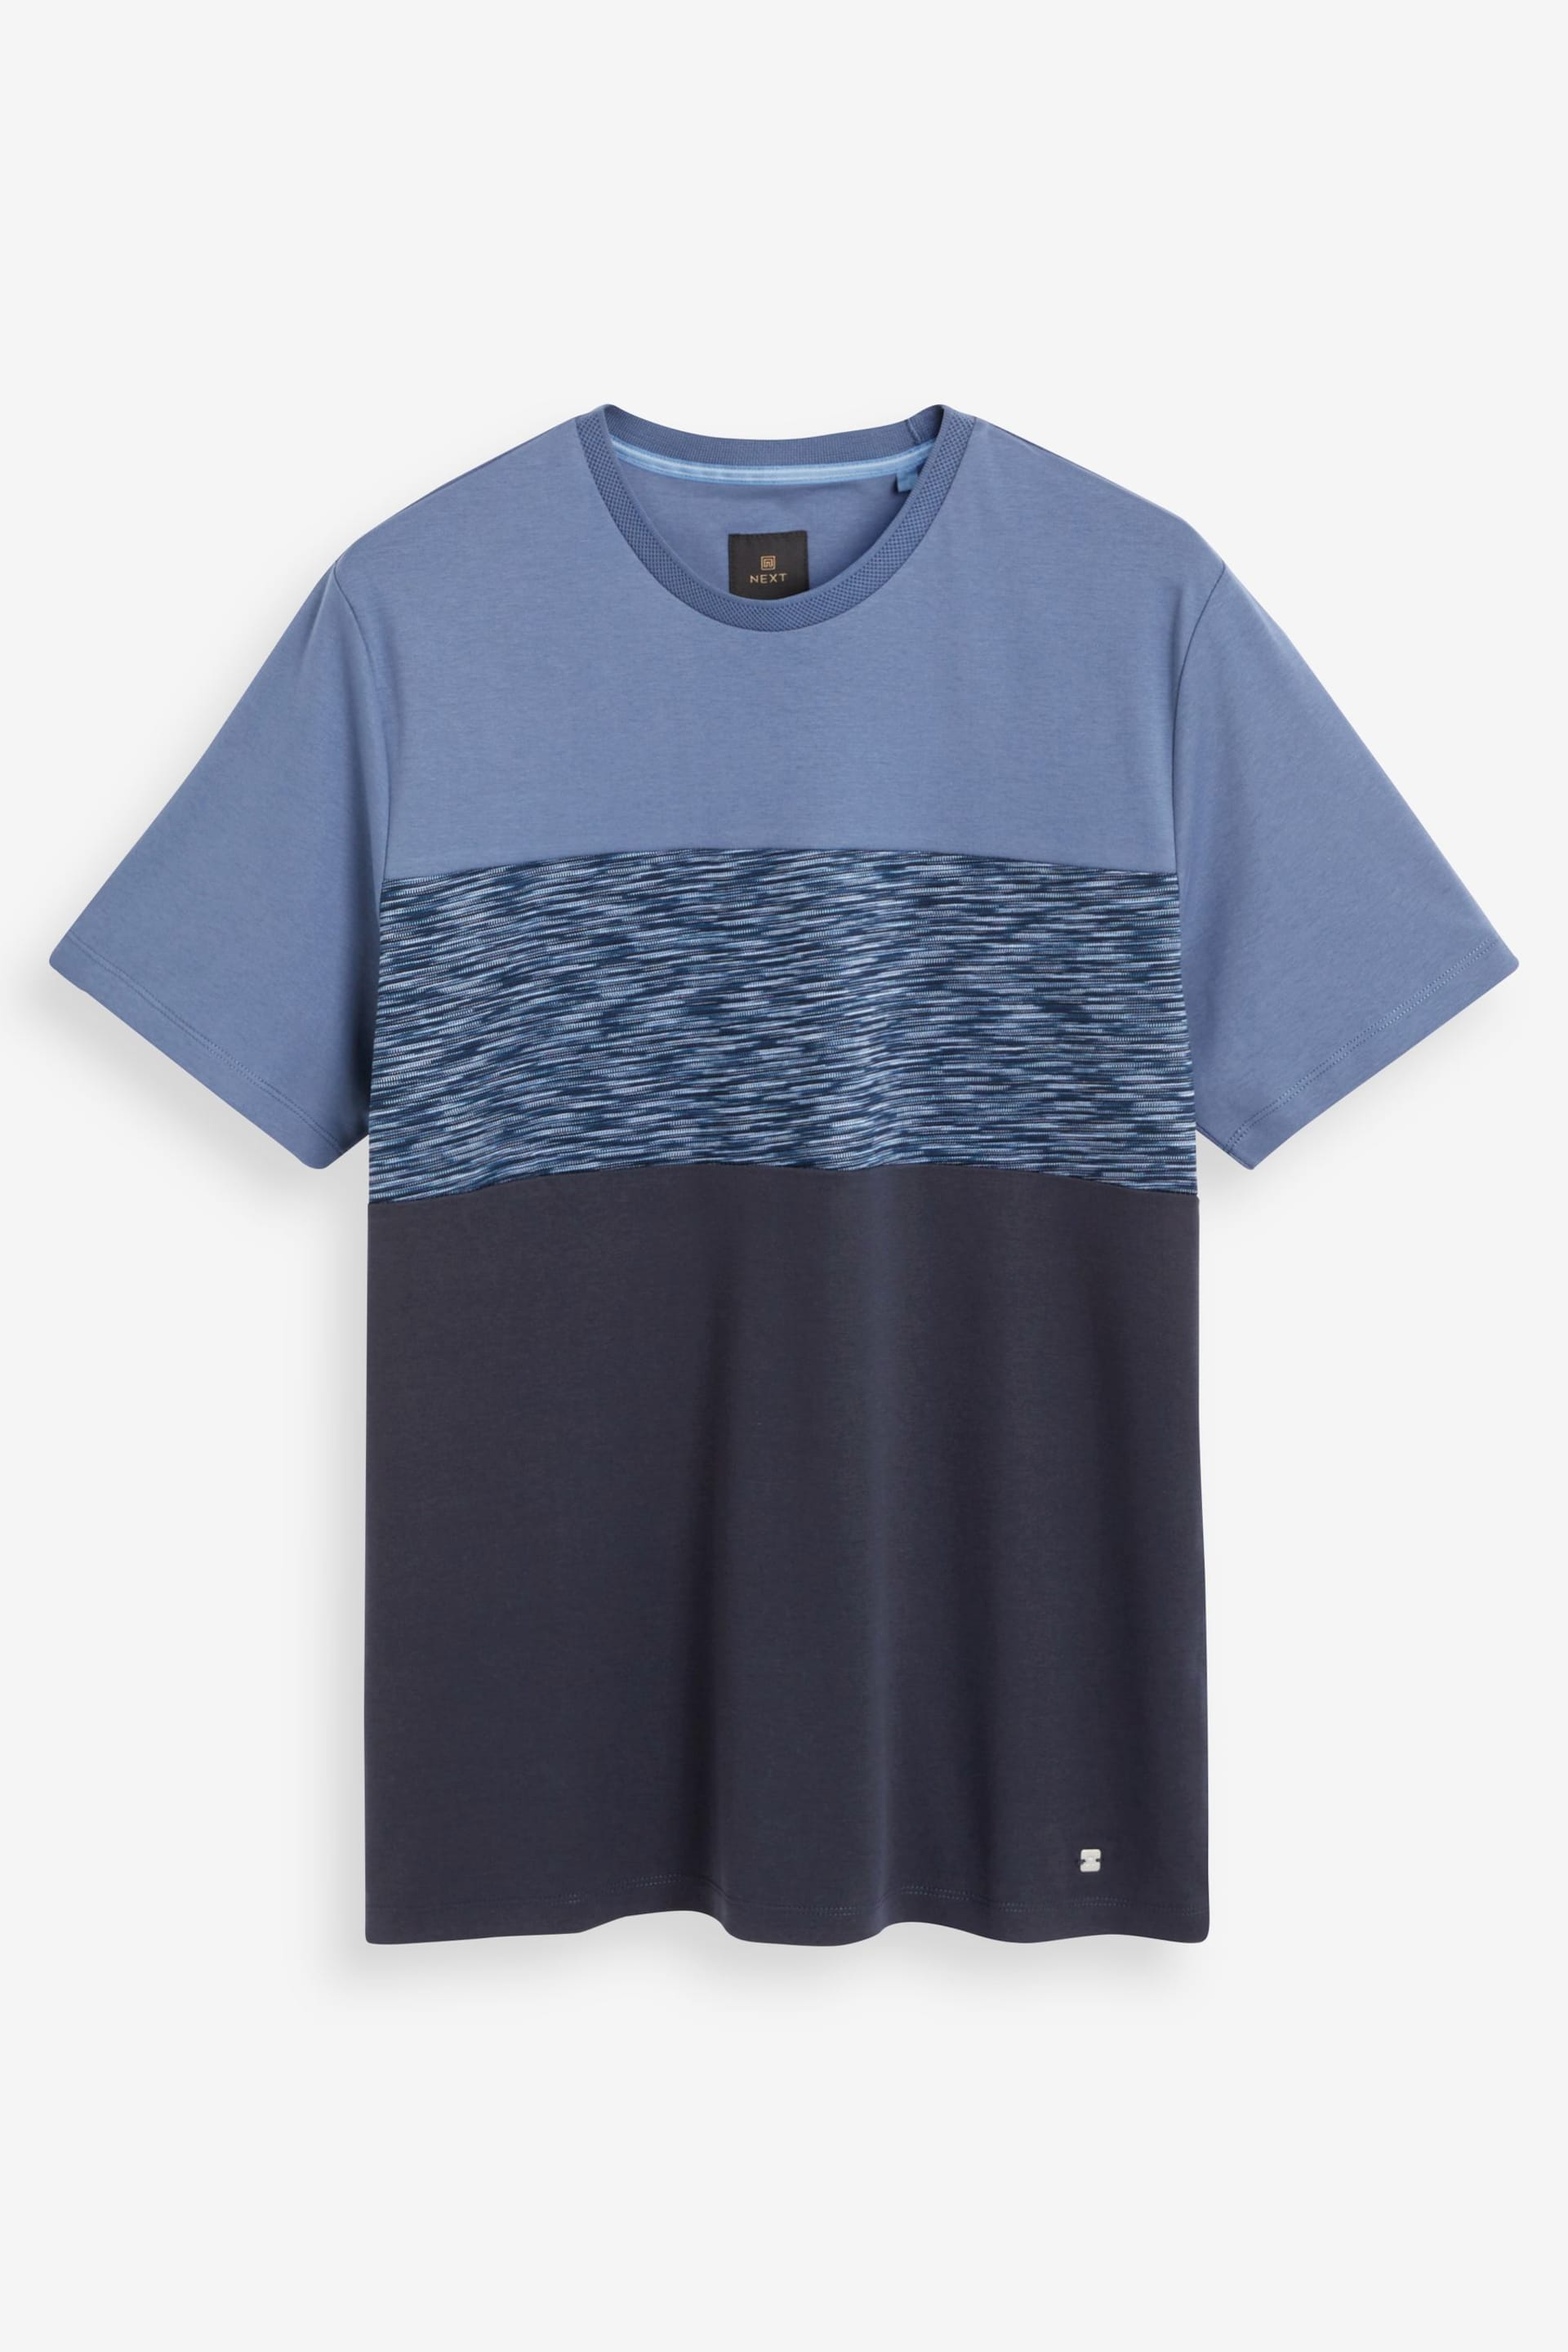 Navy Blue Inject Soft Touch T-Shirt - Image 5 of 7